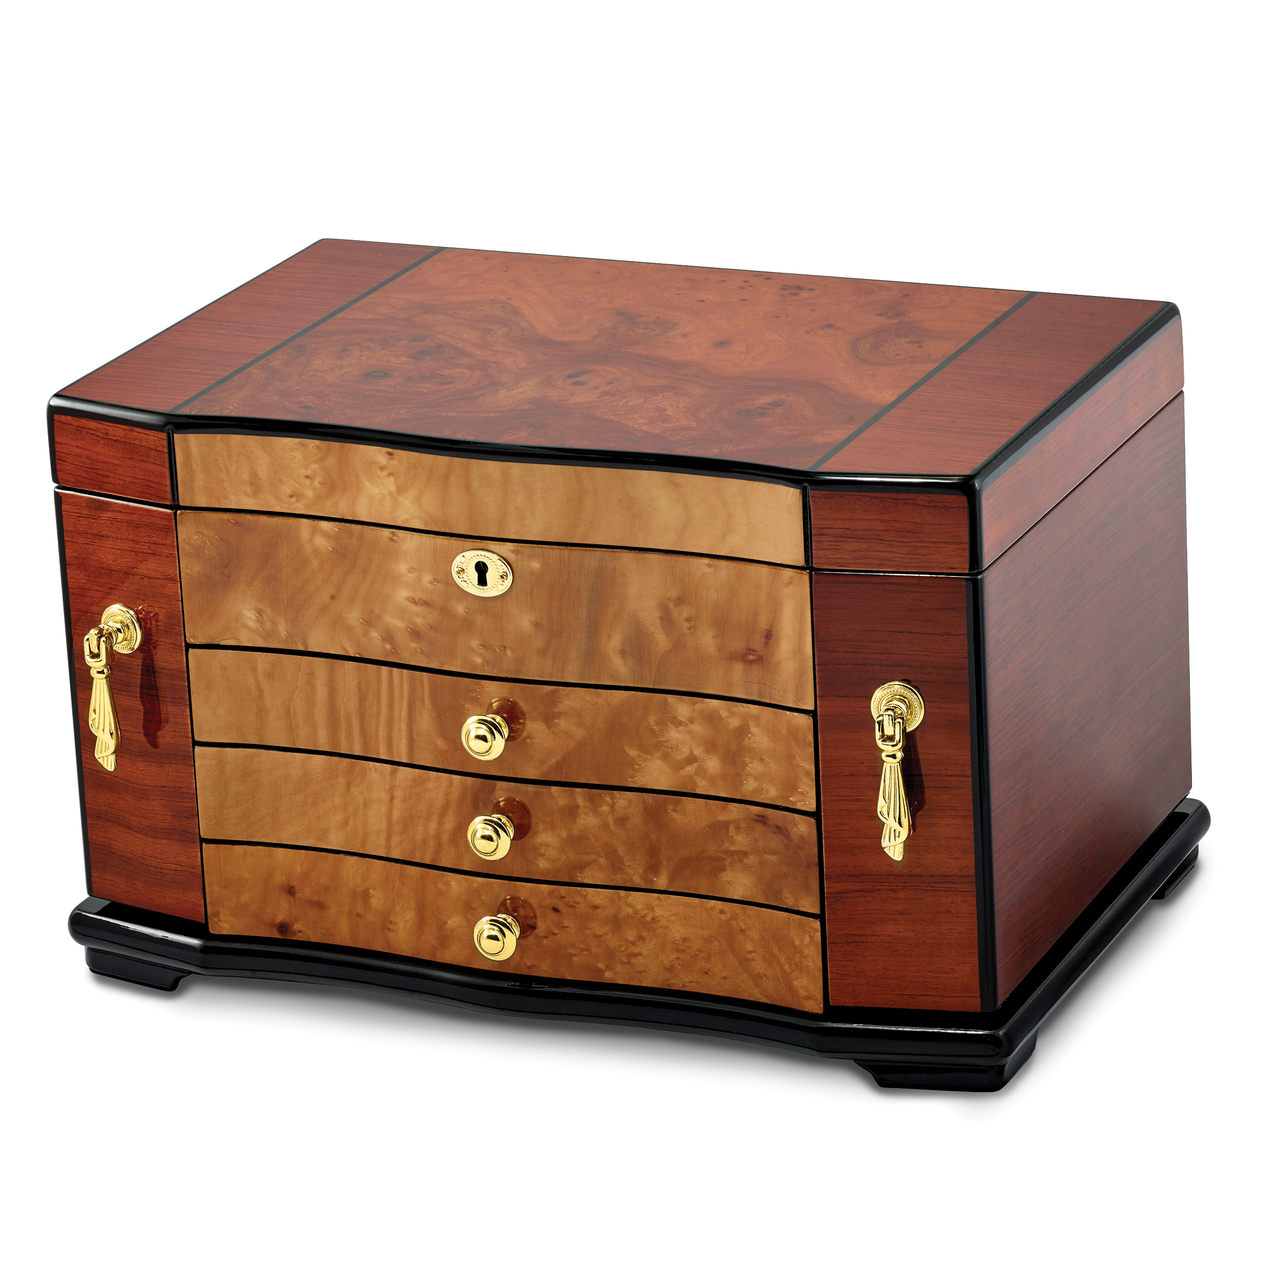 Bubinga with Elm Burl Inlay 3 Drawer with Swing-out Sides Jewelry Box by Jere